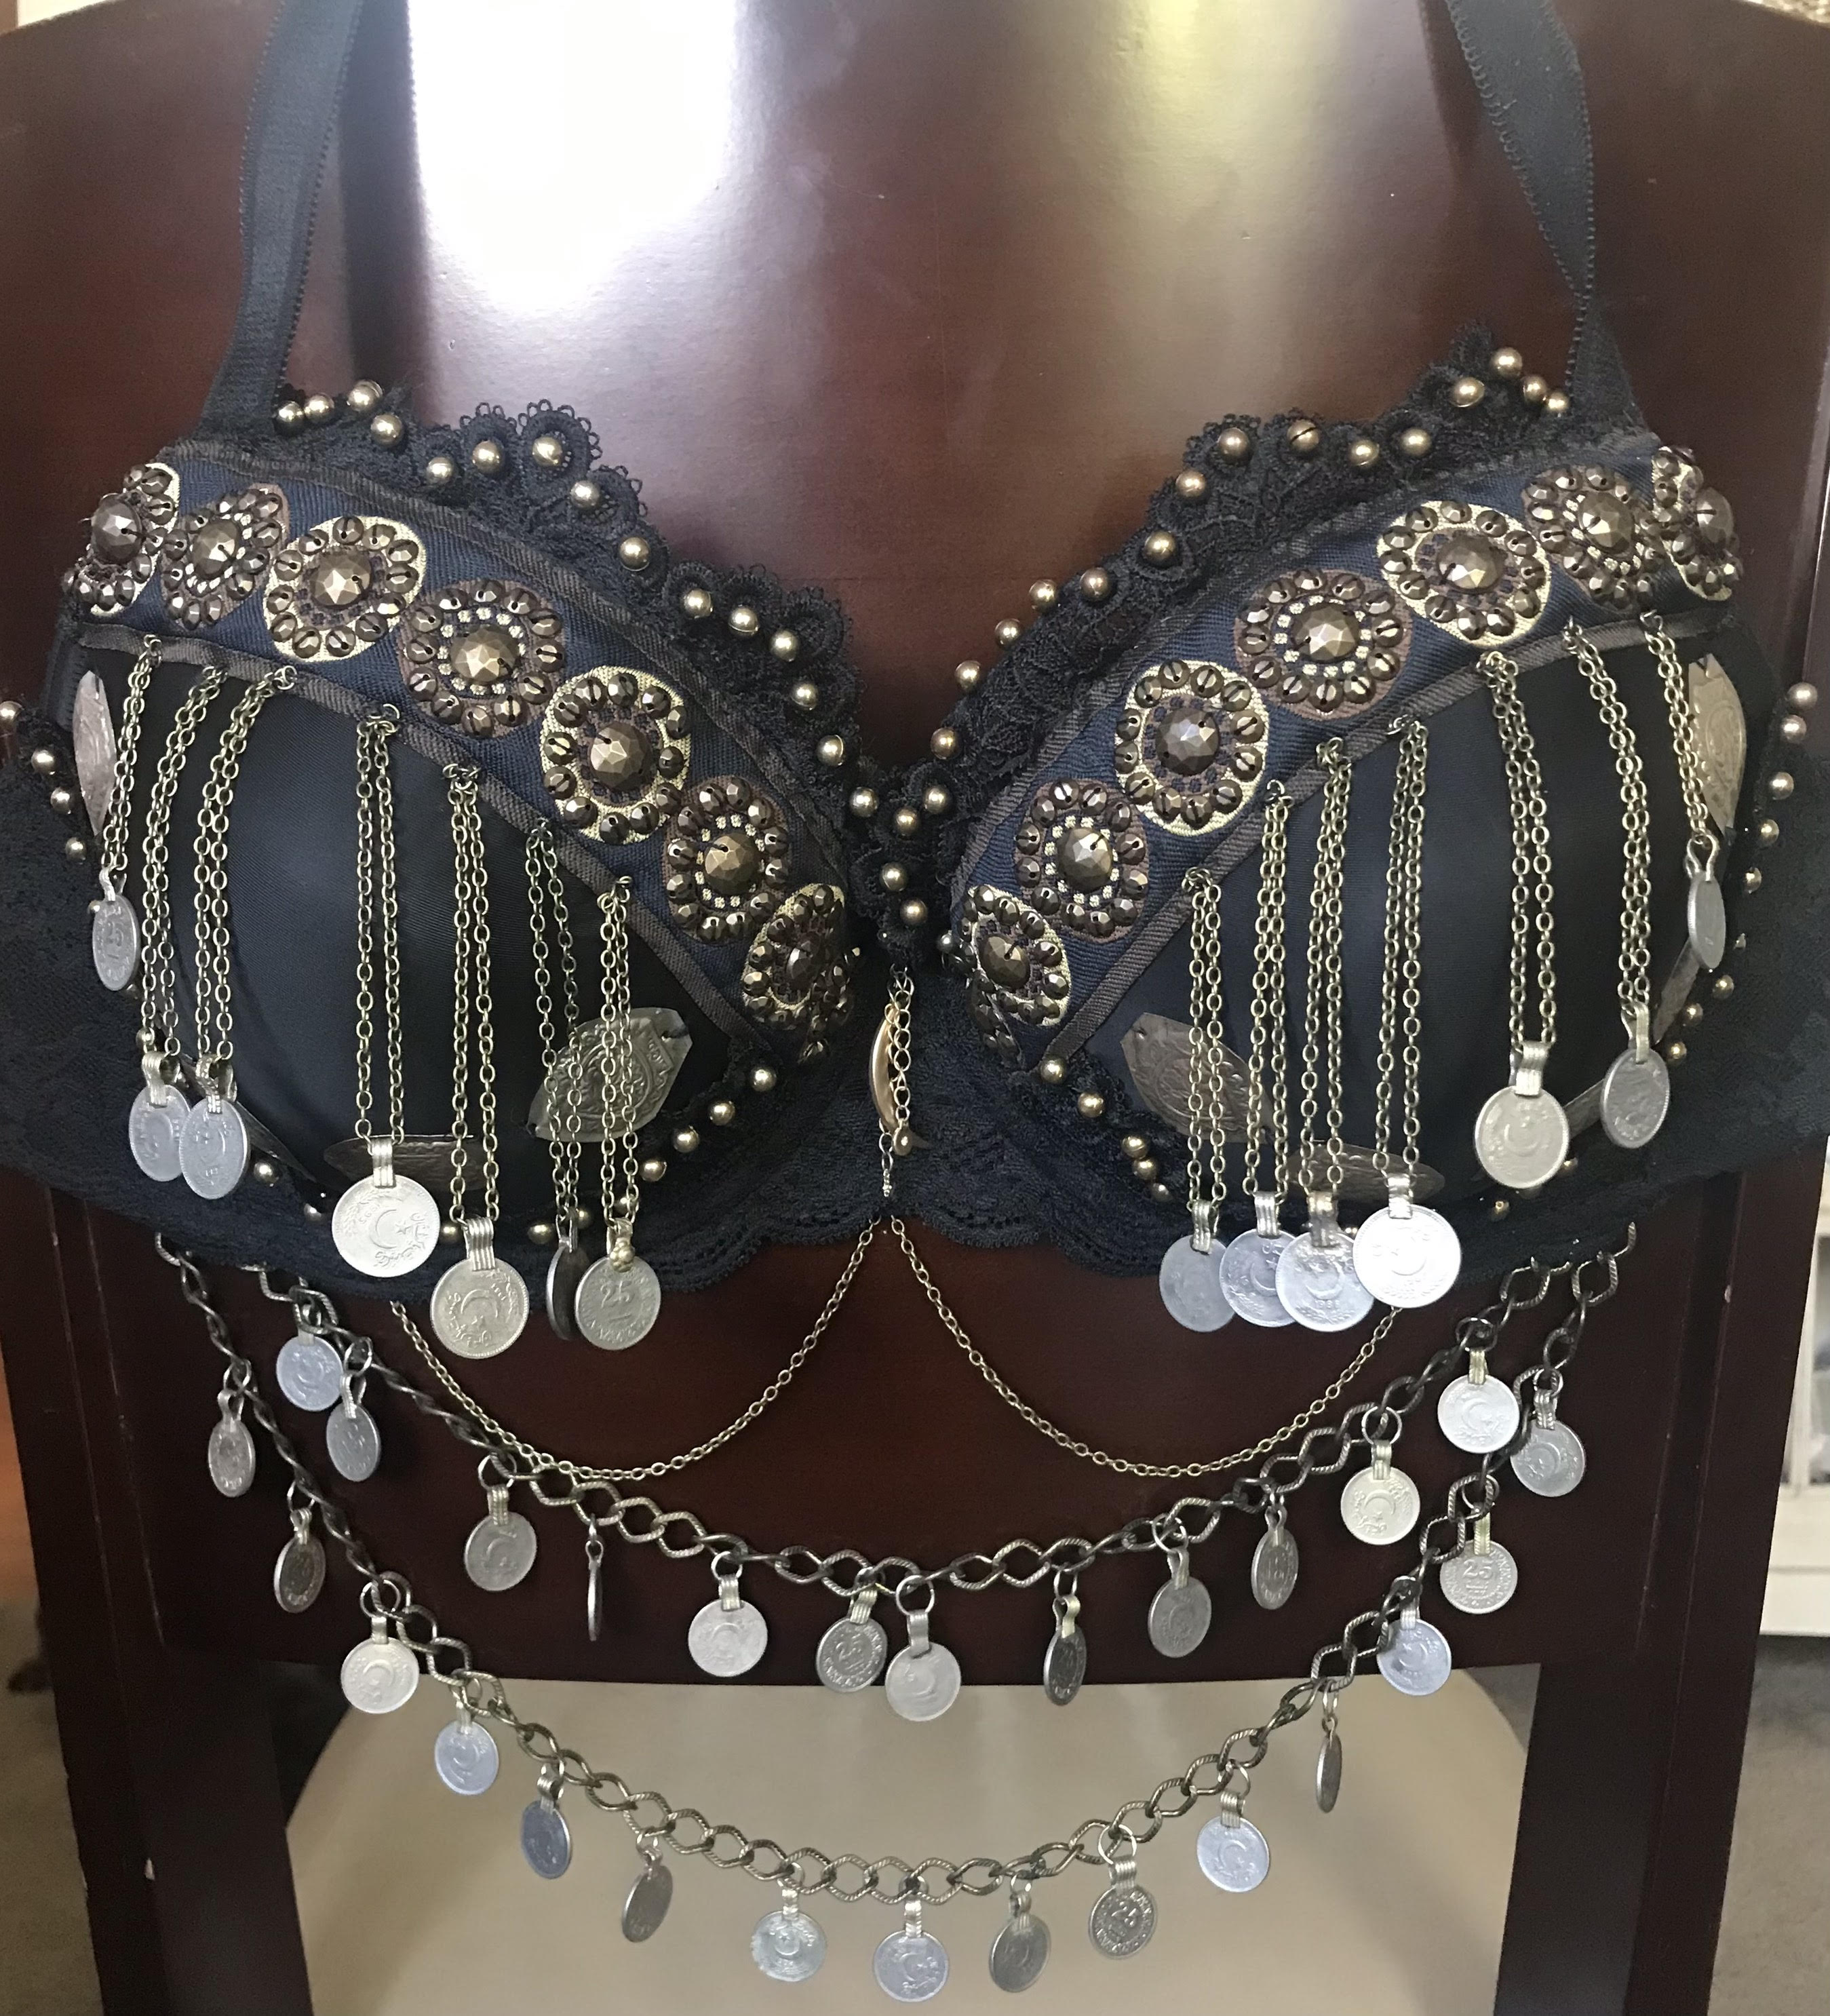 New Ats Tribal Bra Belly Dance Bra Push Up Beaded Coins Vintage